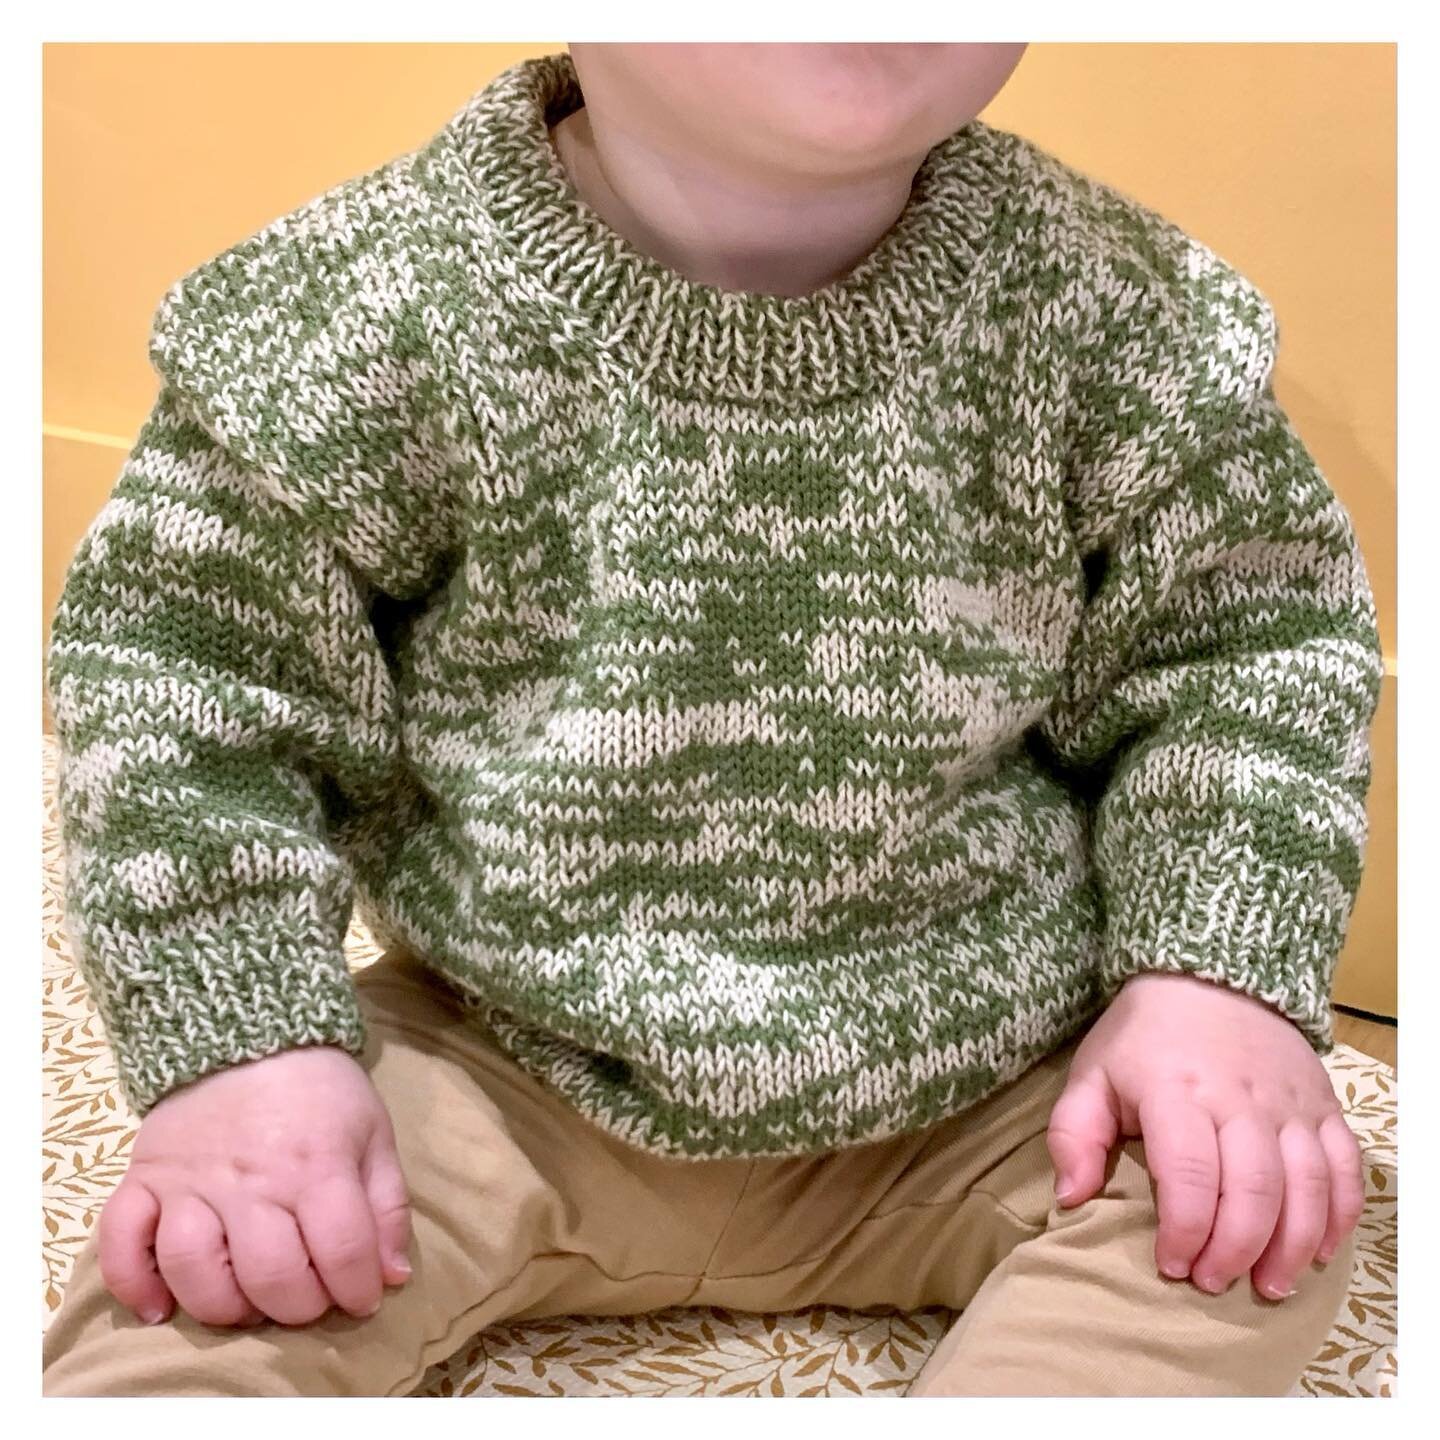 Completed Melange Sweater Baby along with wriggly model ❤️ 

Yarn: Sunday by @sandnesgarn in Green 9062 and Almond 2512. Purchased from @knitt_yarns. 

Pattern: Melange Sweater Baby by @petiteknit 

Model: My own. 

#melangesweater #melangesweaterbab